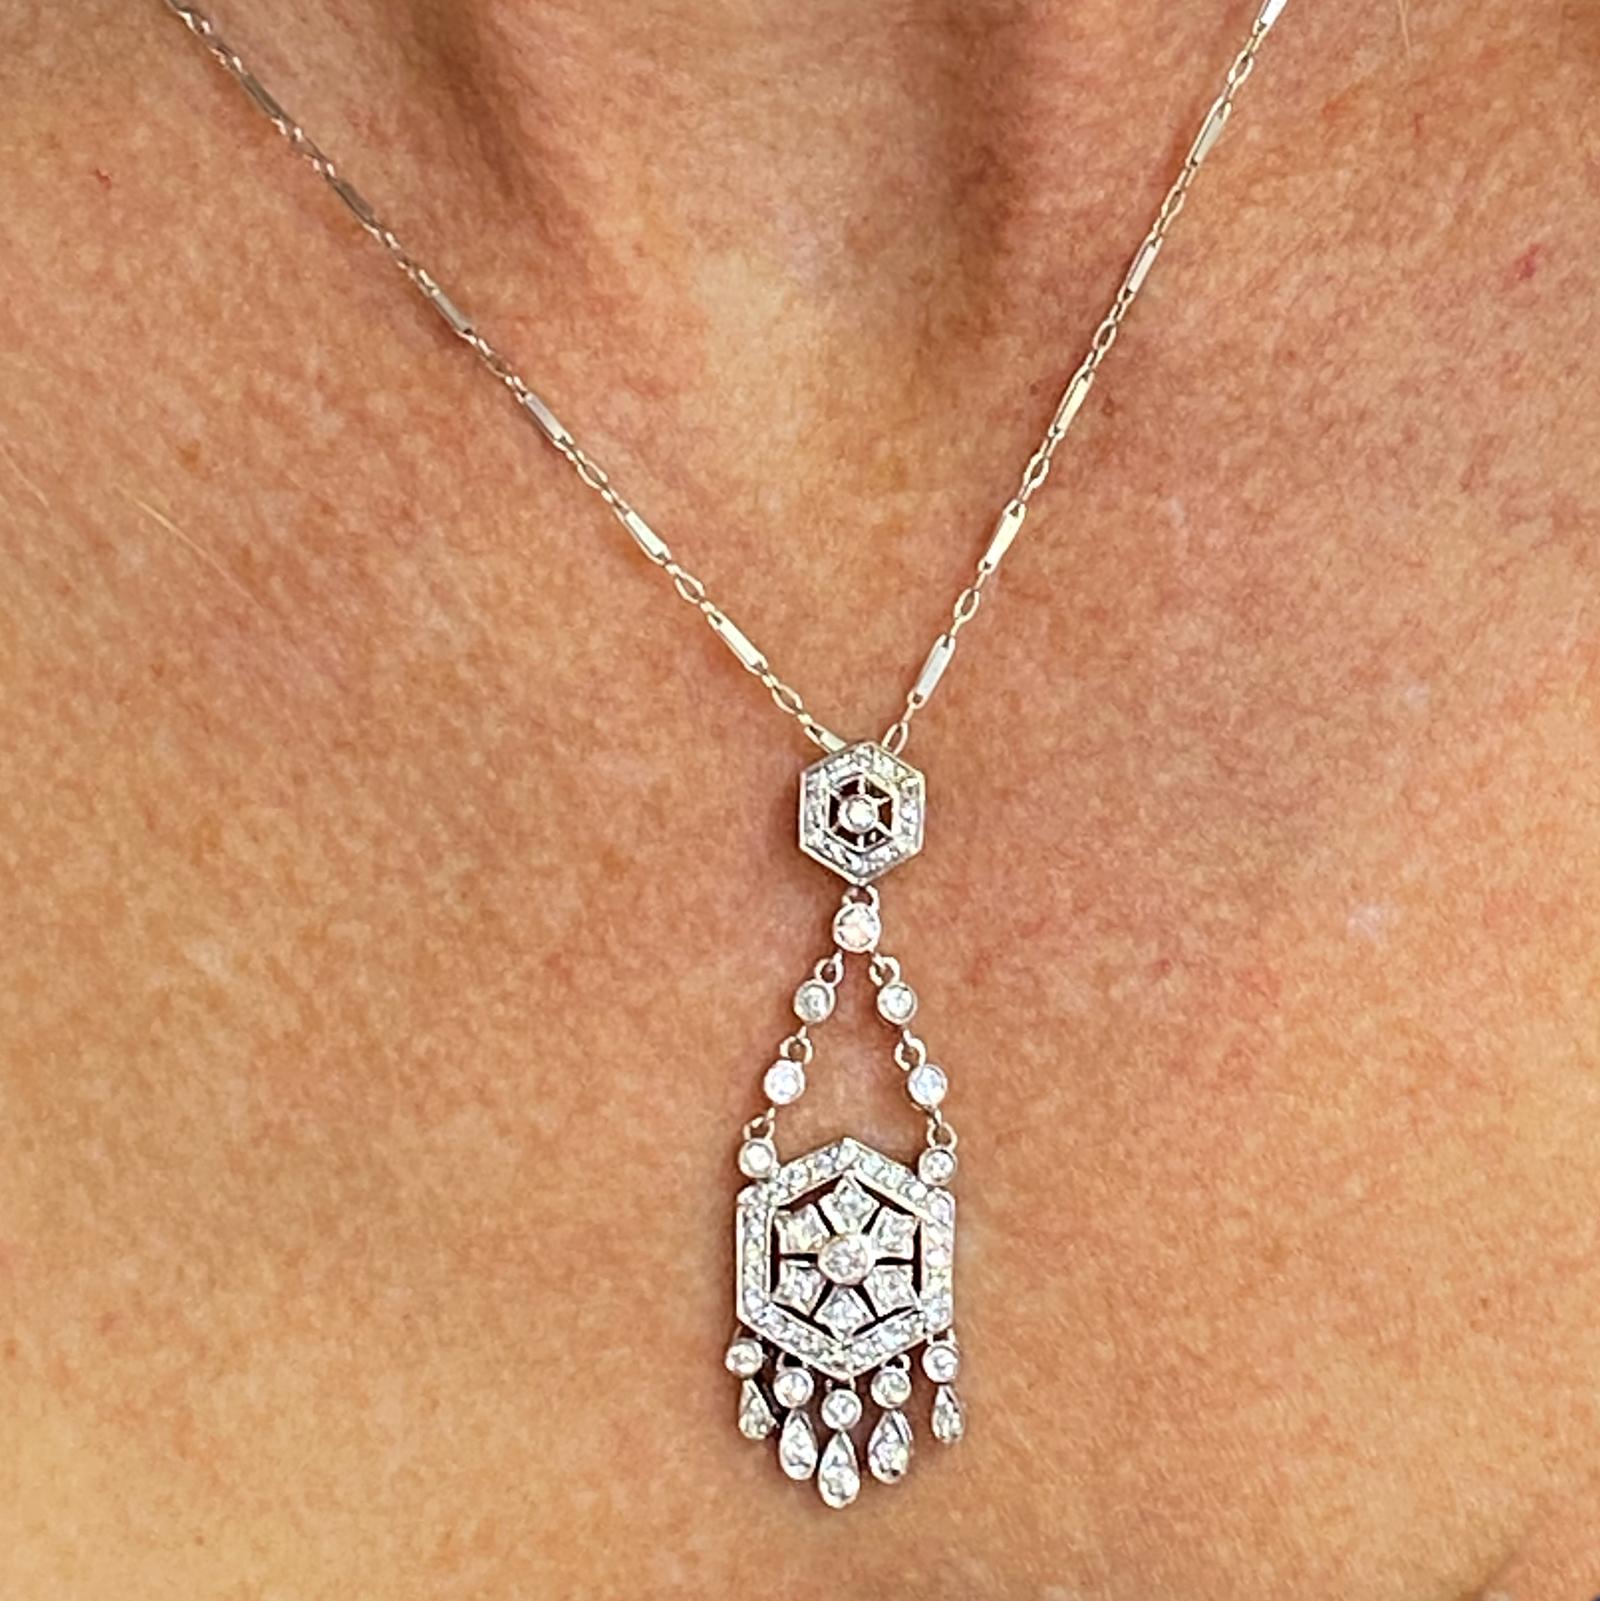 Diamond drop pendant fashioned in 18 karat white gold. The pendant measures 1.75 inches in length, and features 50 round brilliant cut diamonds weighing .86 carat total weight. The diamonds are graded H-I color and SI clarity. The pendant is